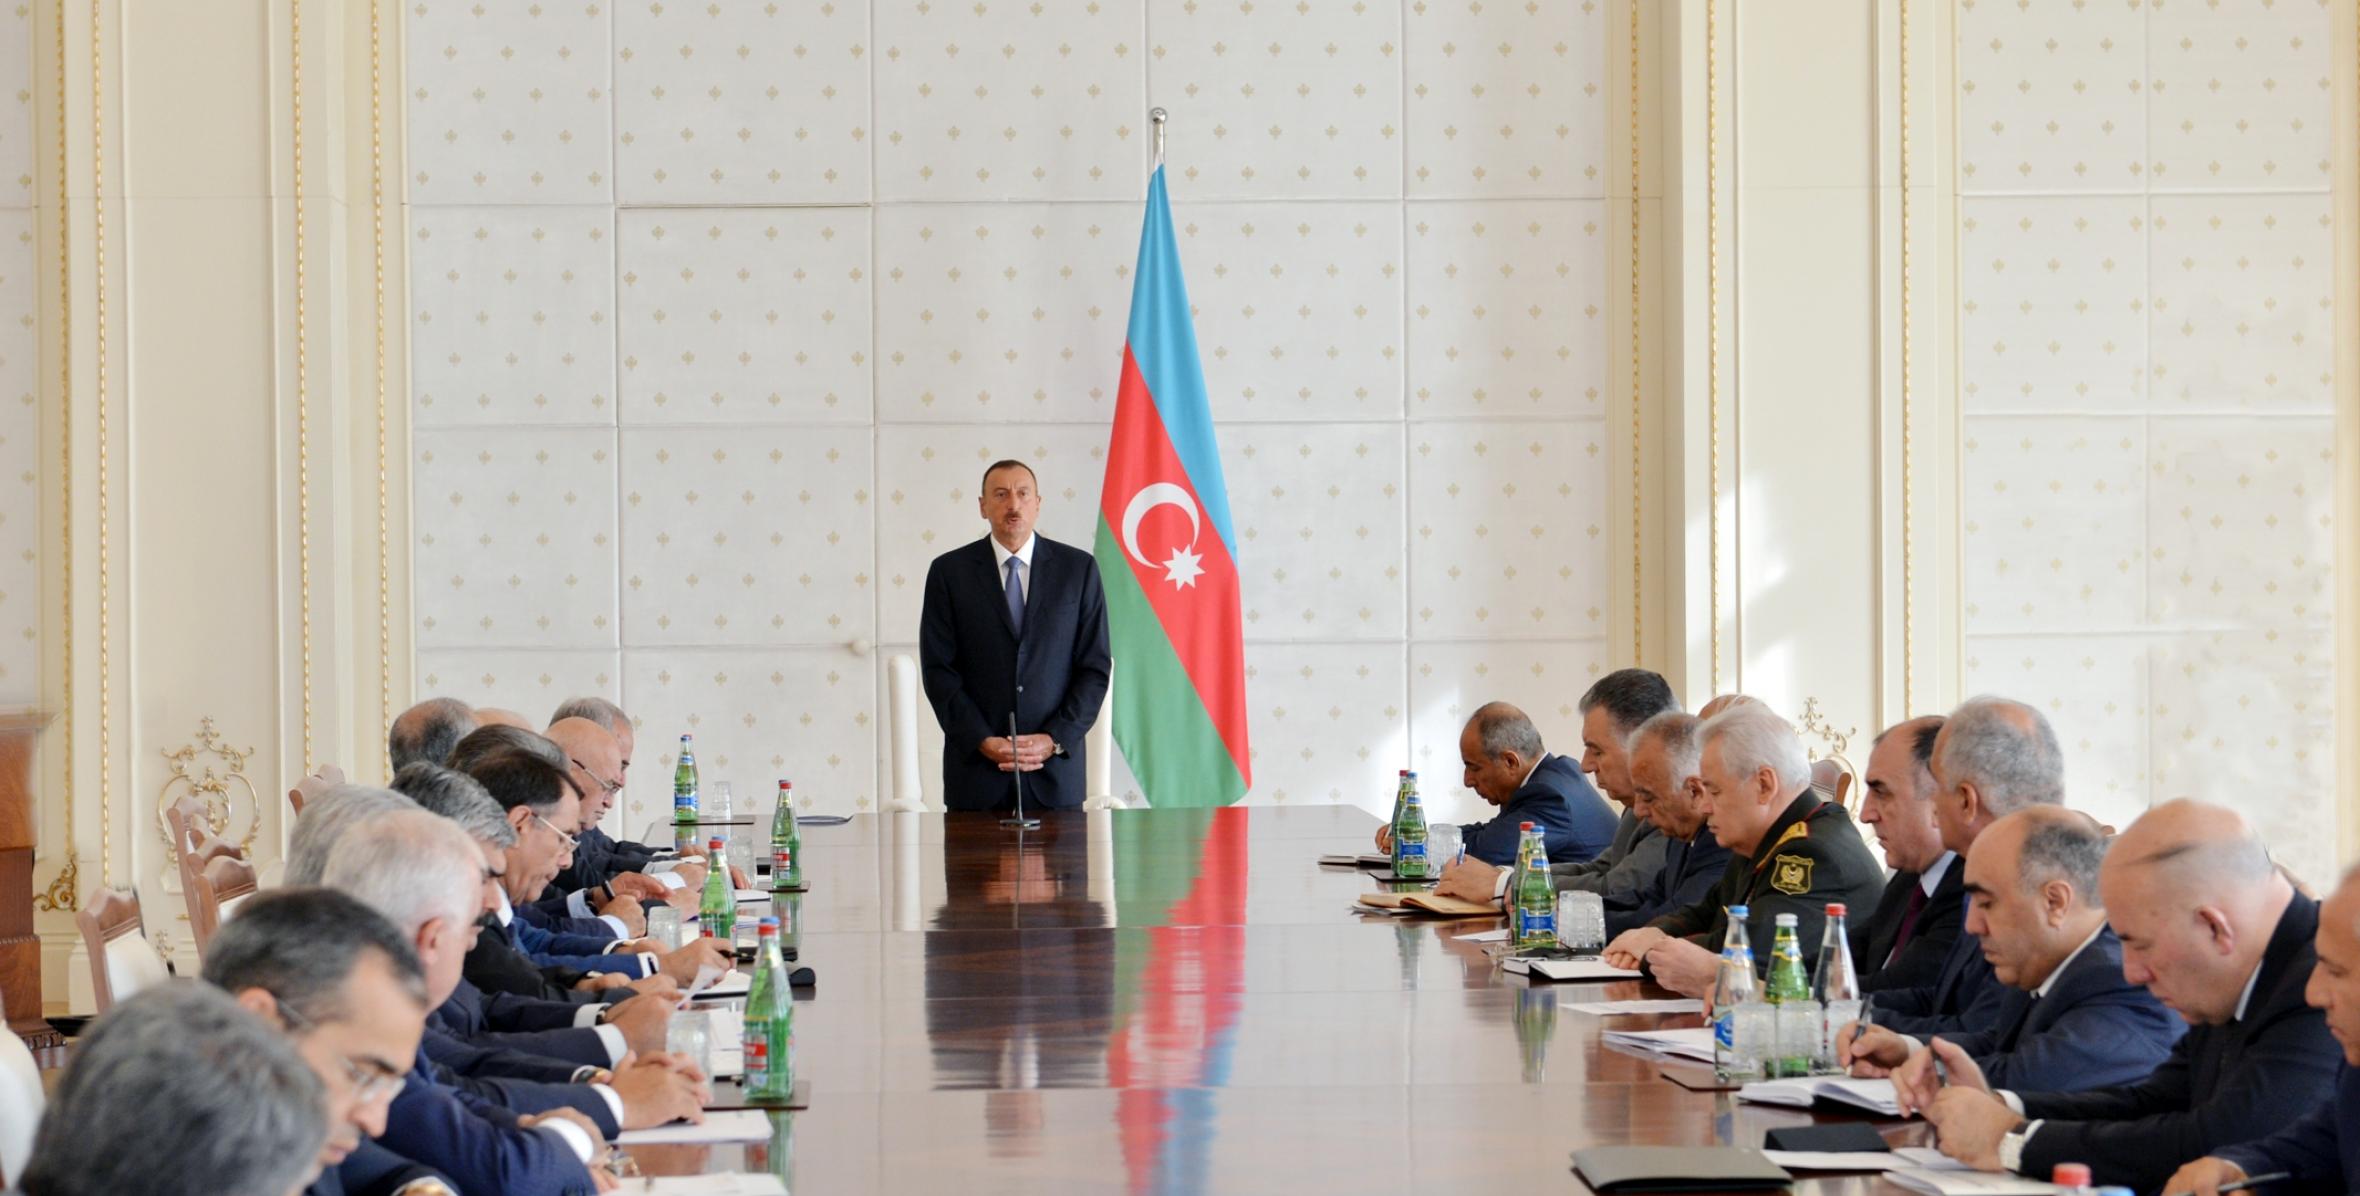 Ilham Aliyev chaired a meeting of the Cabinet of Ministers dedicated to the results of socioeconomic development in the first six months of 2013 and future objectives